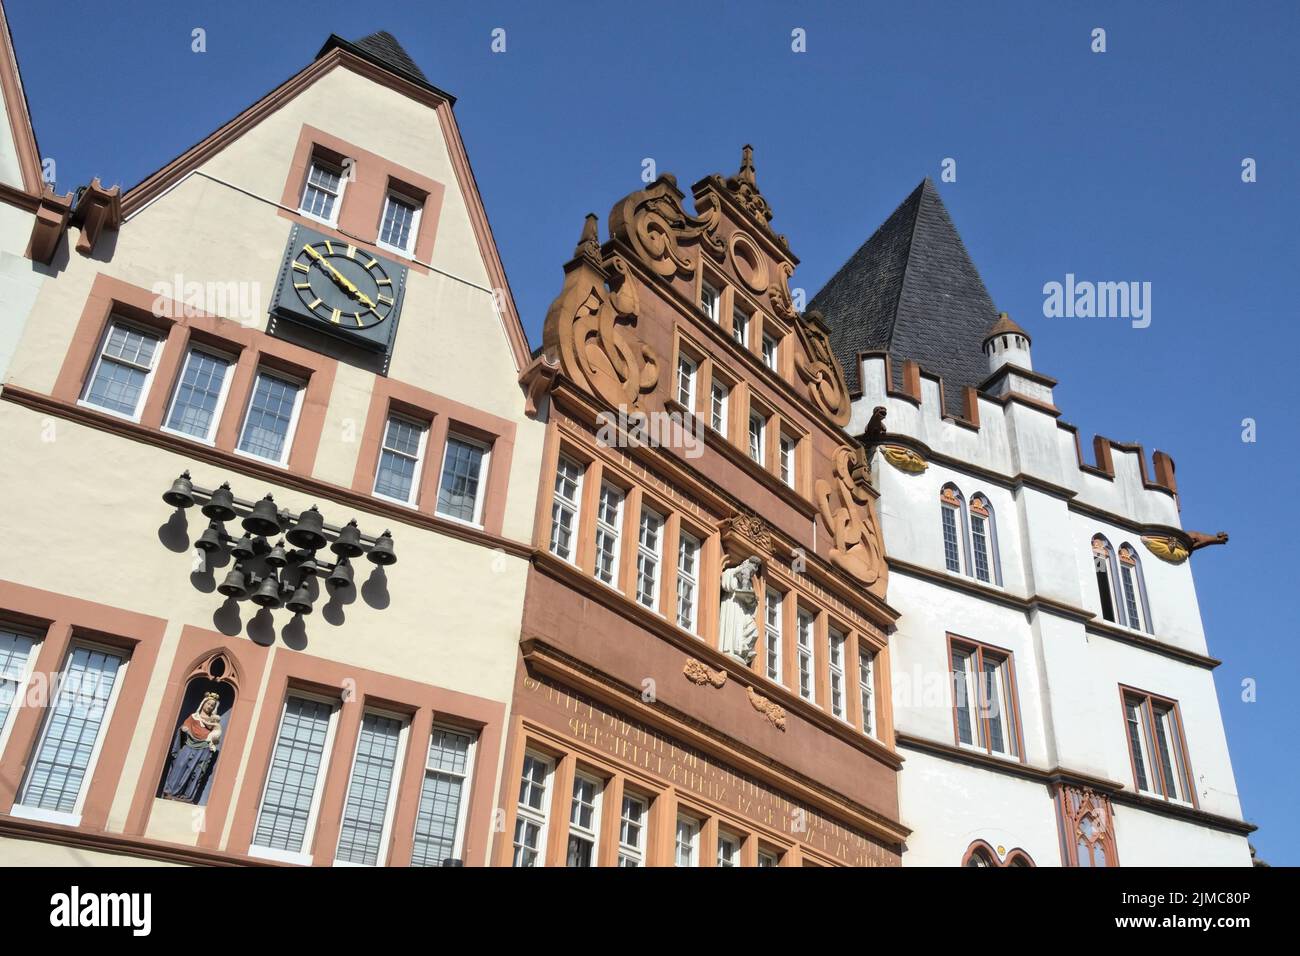 Trier - In the old town, Germany Stock Photo